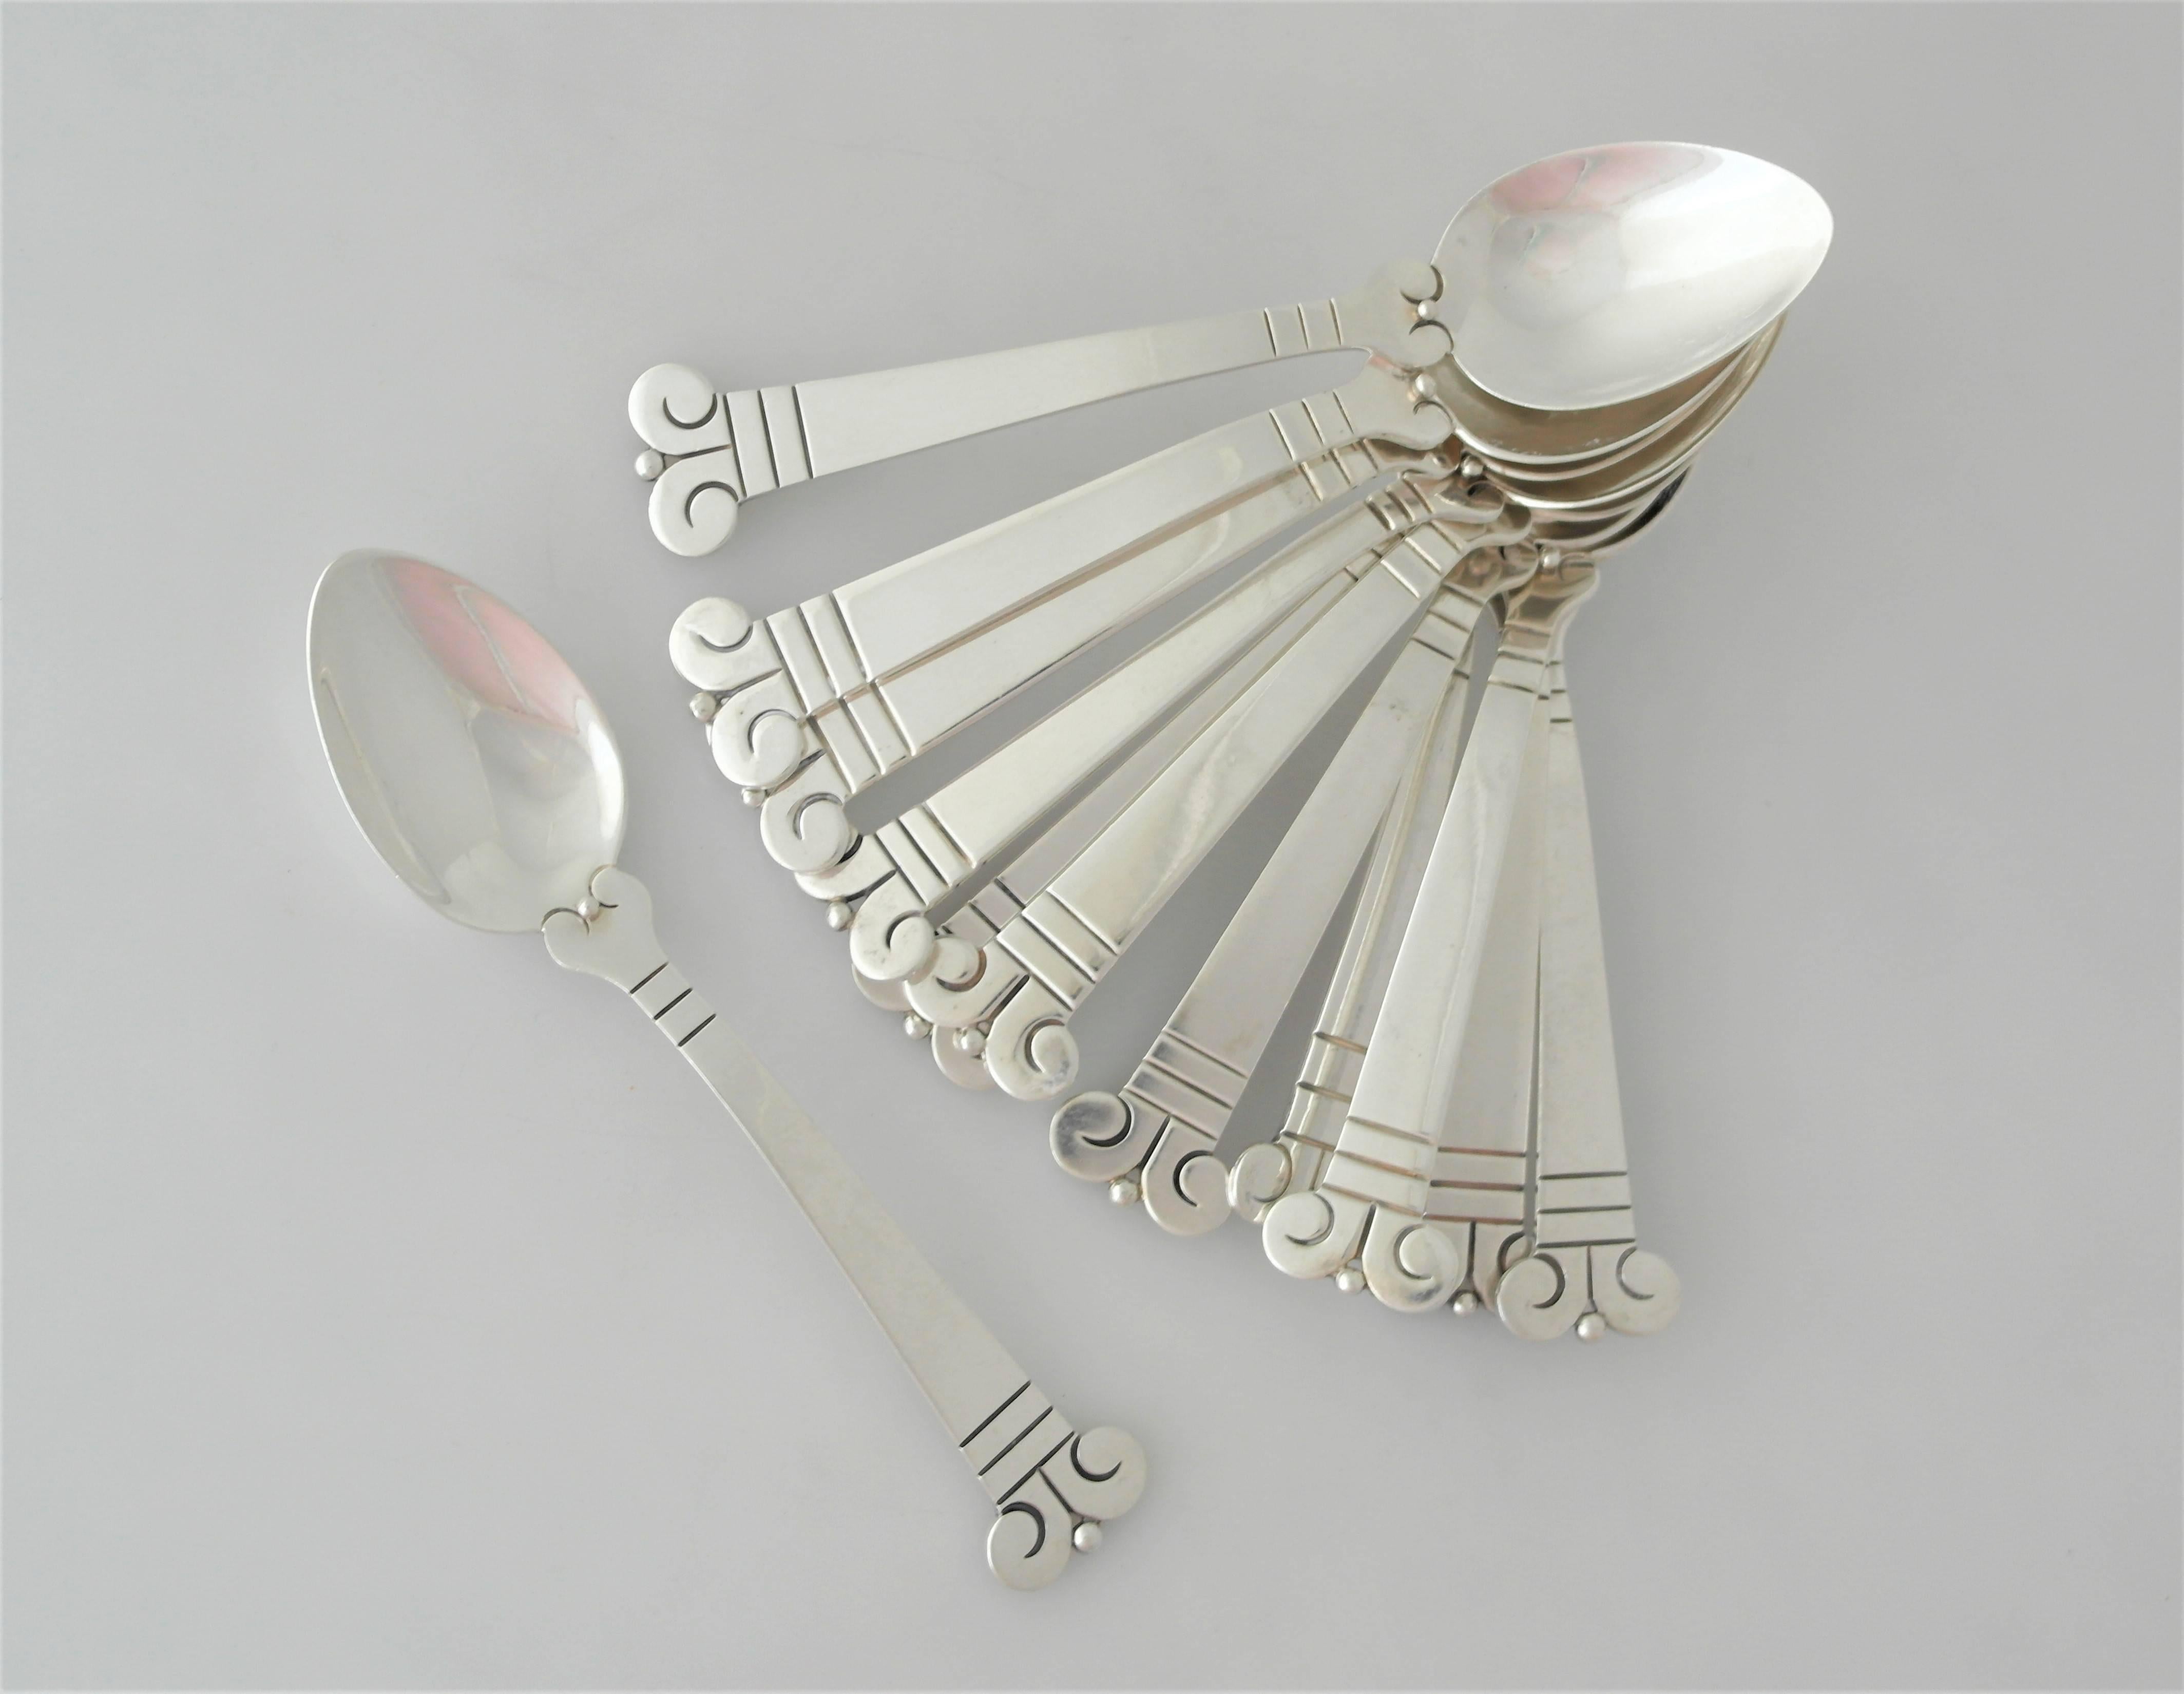 Being offered are a set of 12 spoons made by Hector Aguilar of Taxco, Mexico.